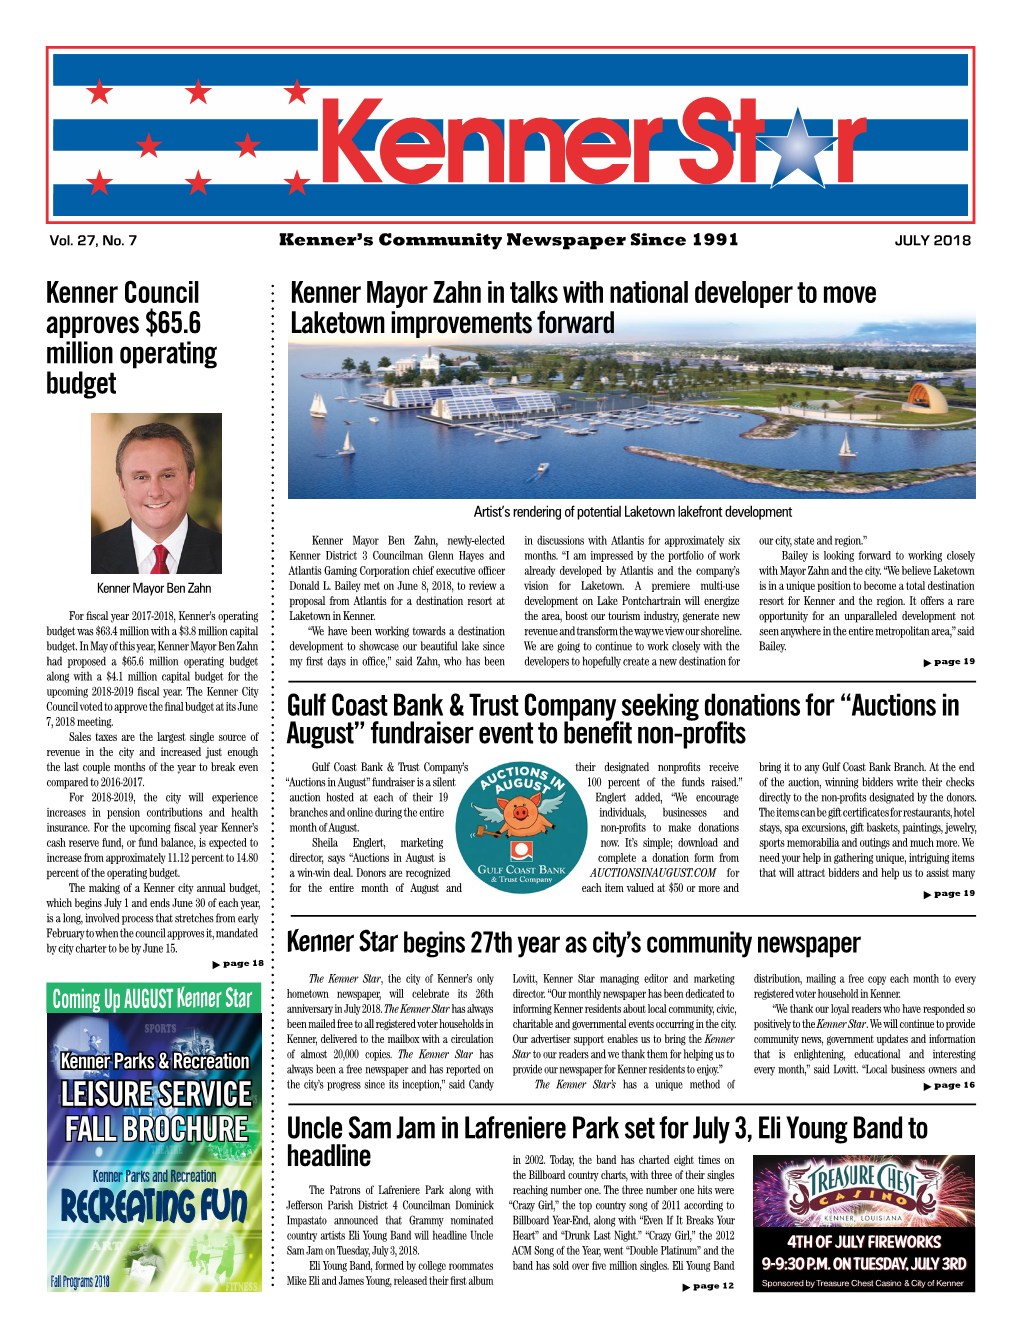 JULY 2018 Kenner Council Kenner Mayor Zahn in Talks with National Developer to Move Approves $65.6 Laketown Improvements Forward Million Operating Budget